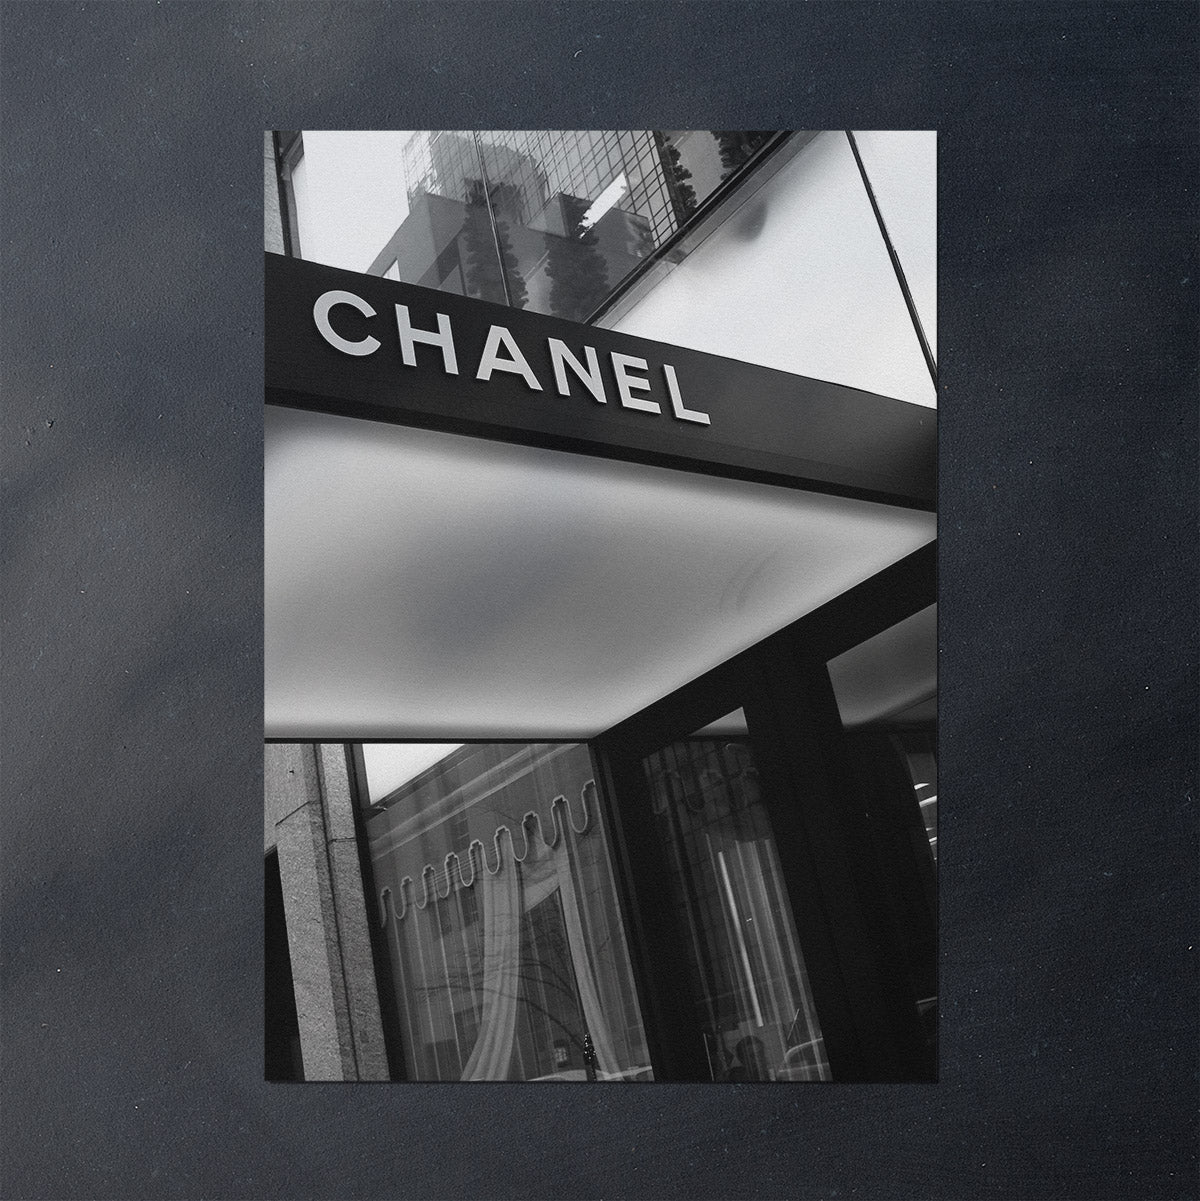 Chanel photography poster